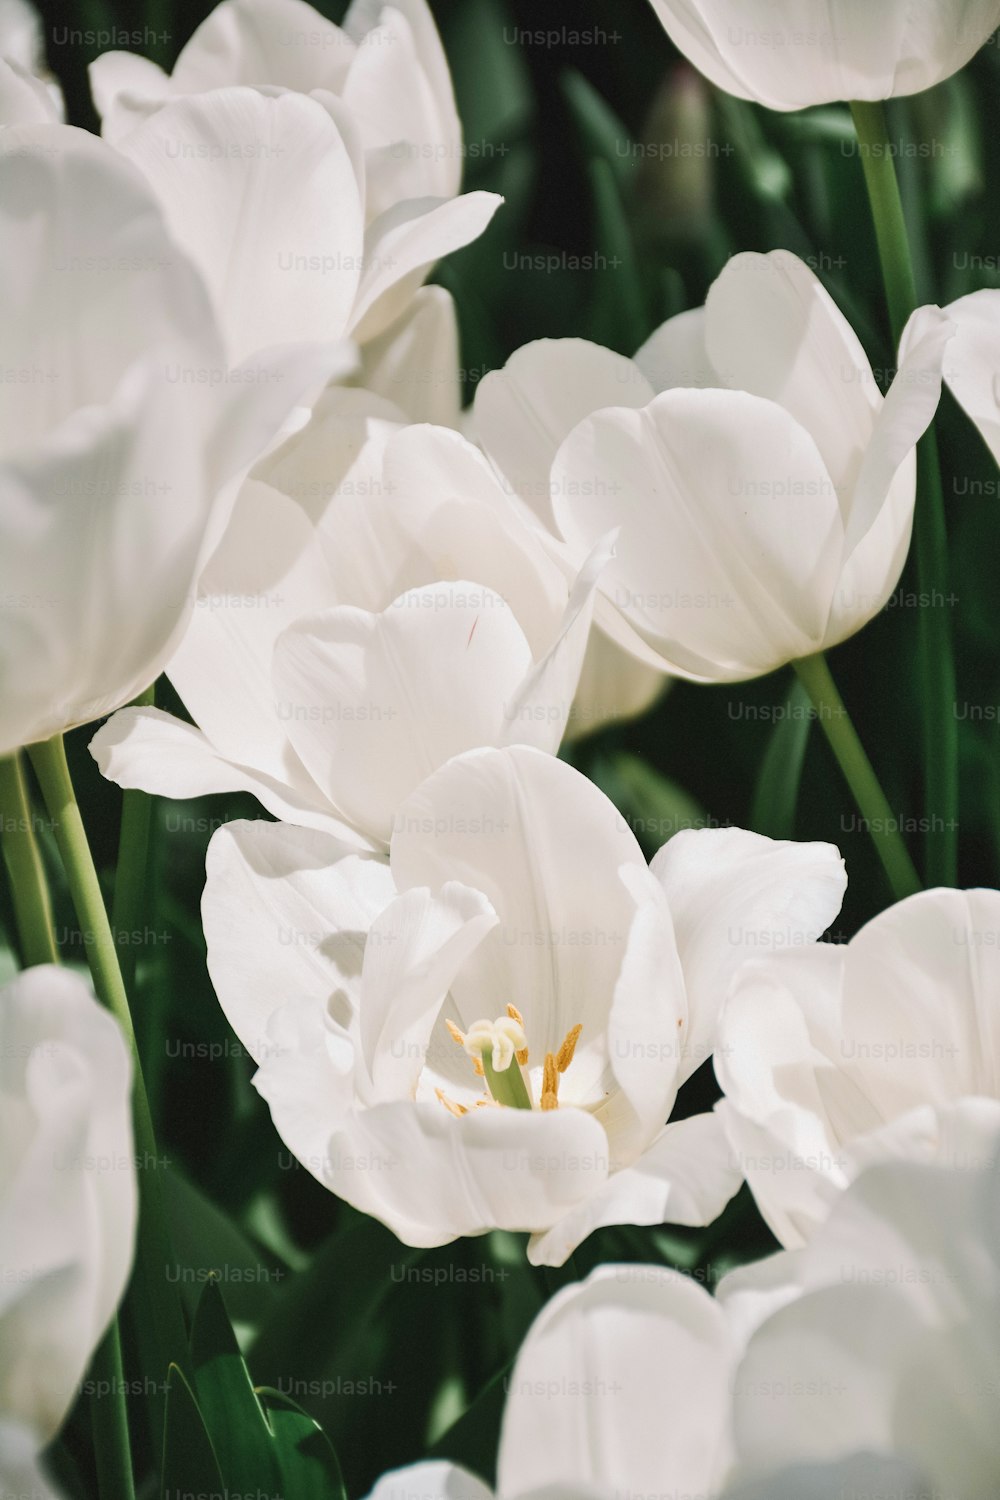 Flowers Wallpaper Pictures | Download Free Images on Unsplash